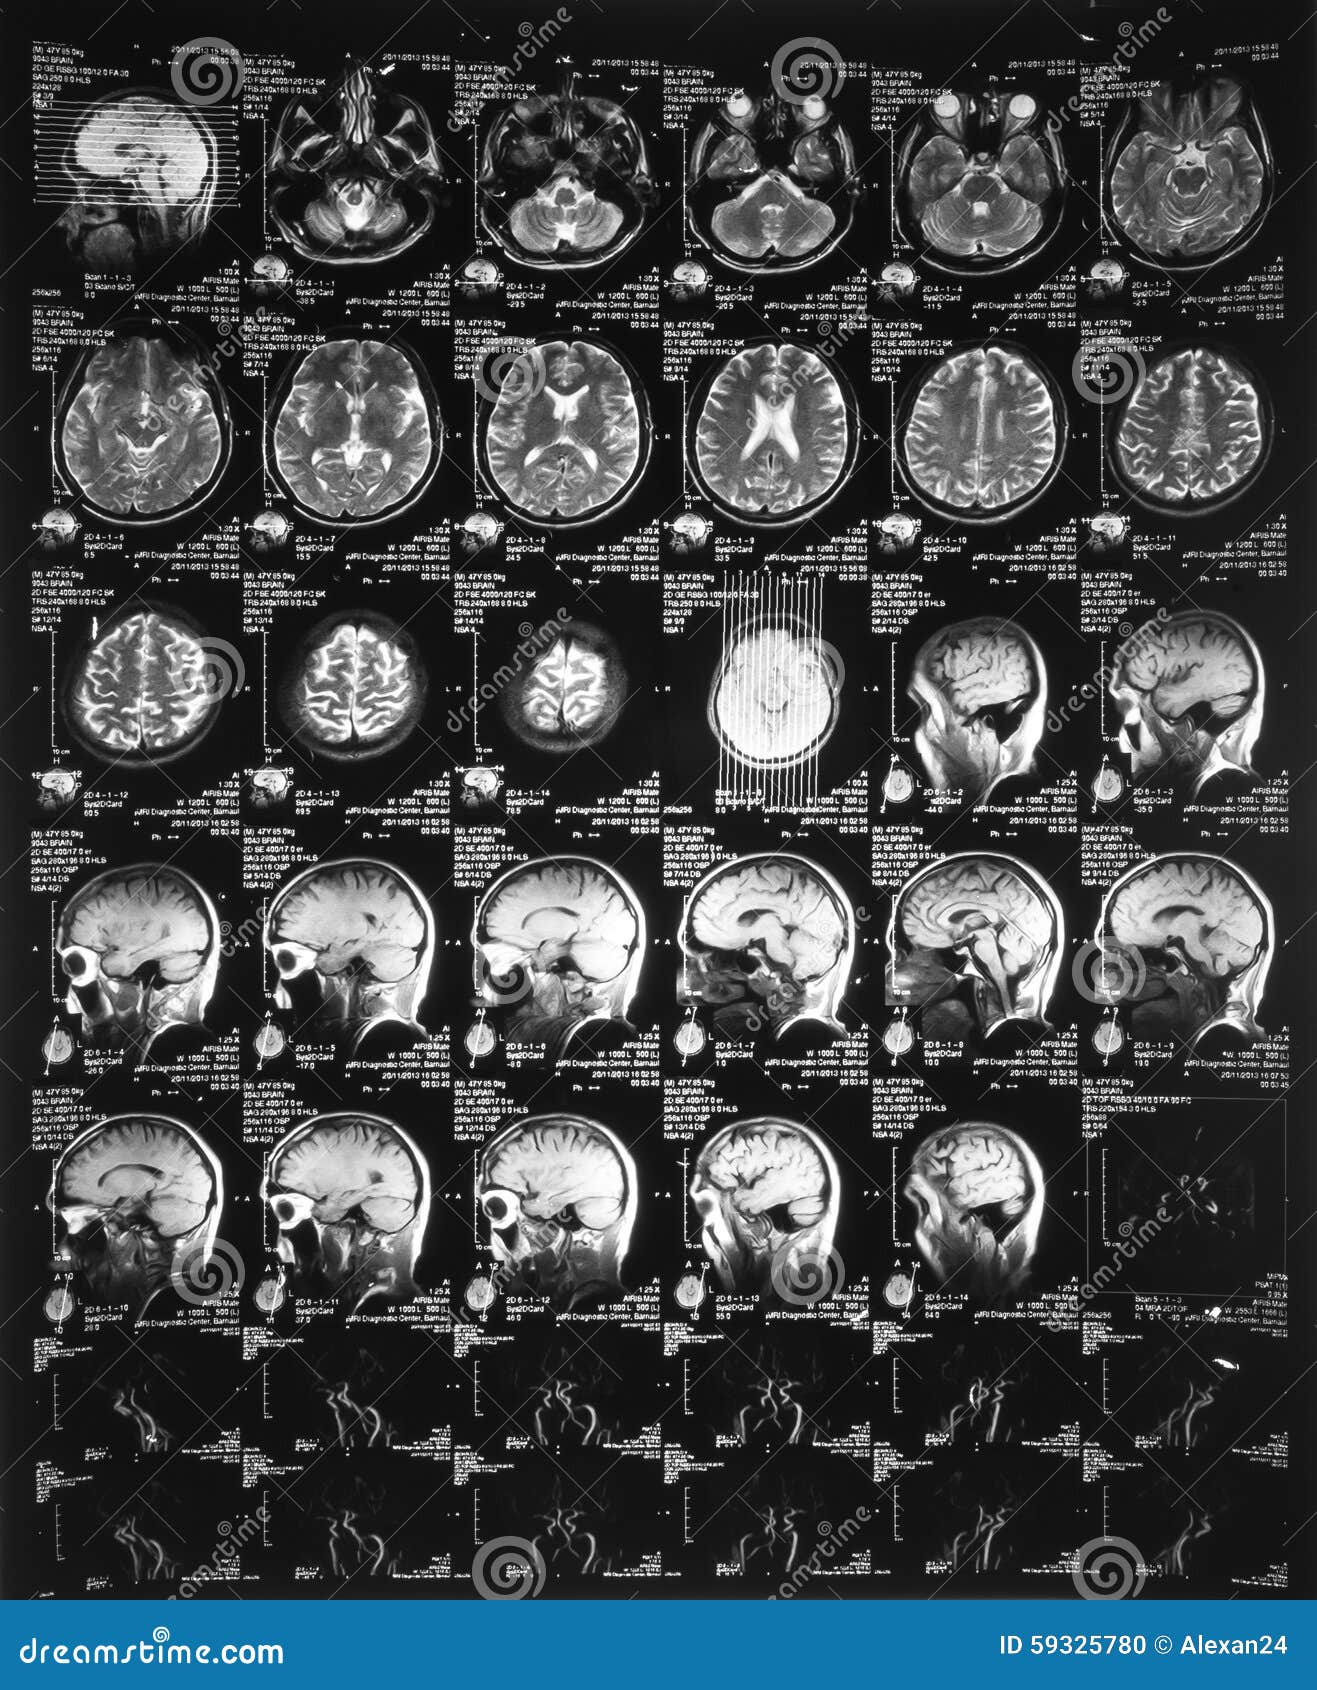 x-ray image of the brain computed tomography